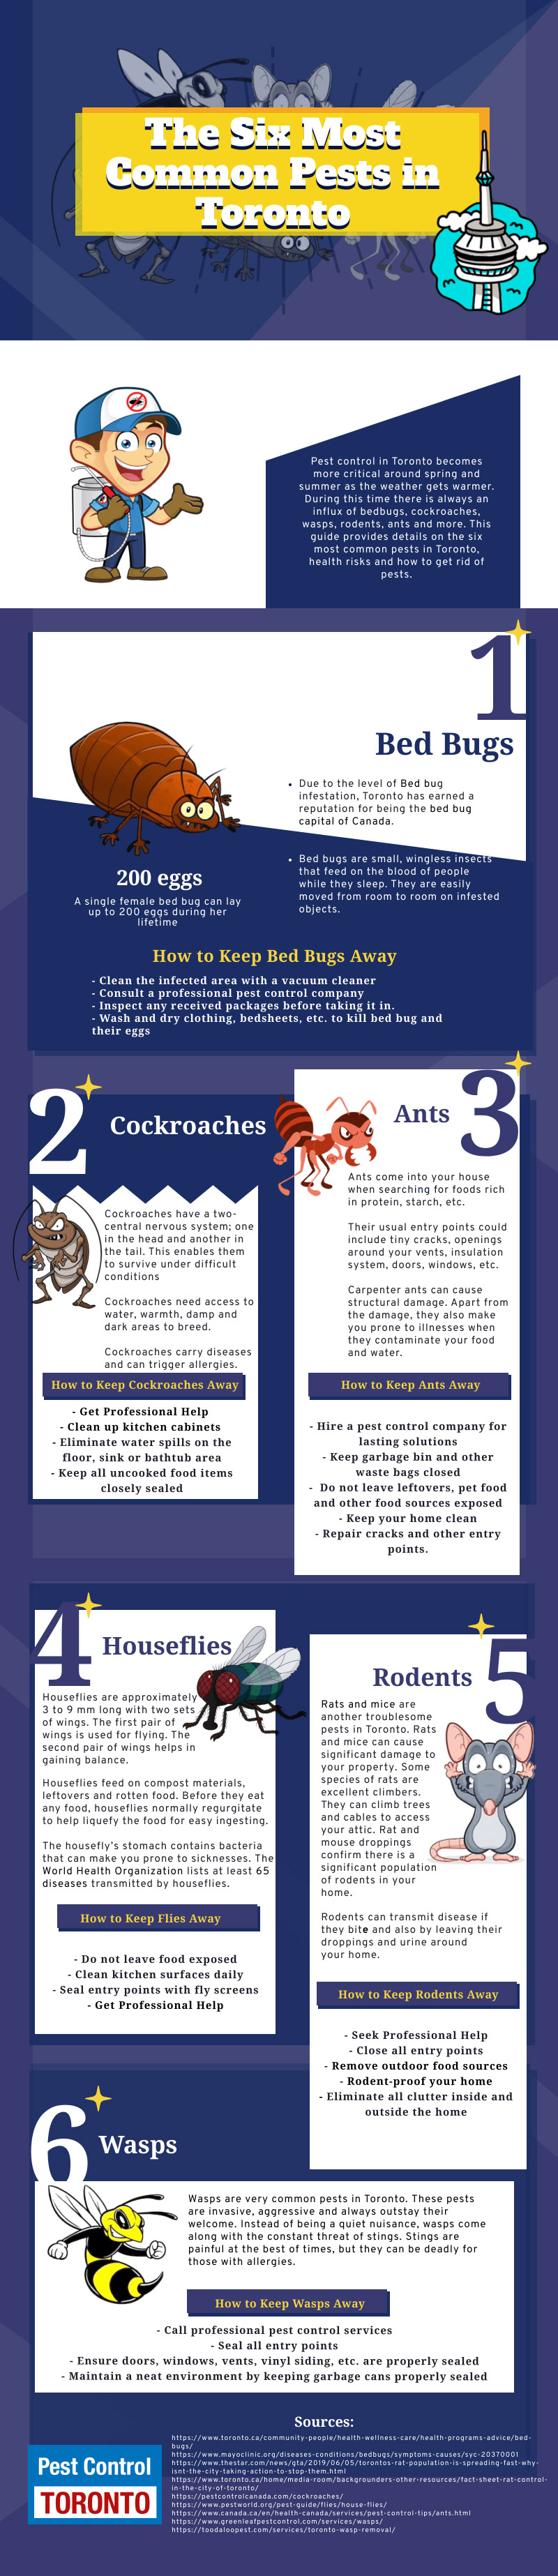 The 6 Most Common Pests in Toronto #infographic